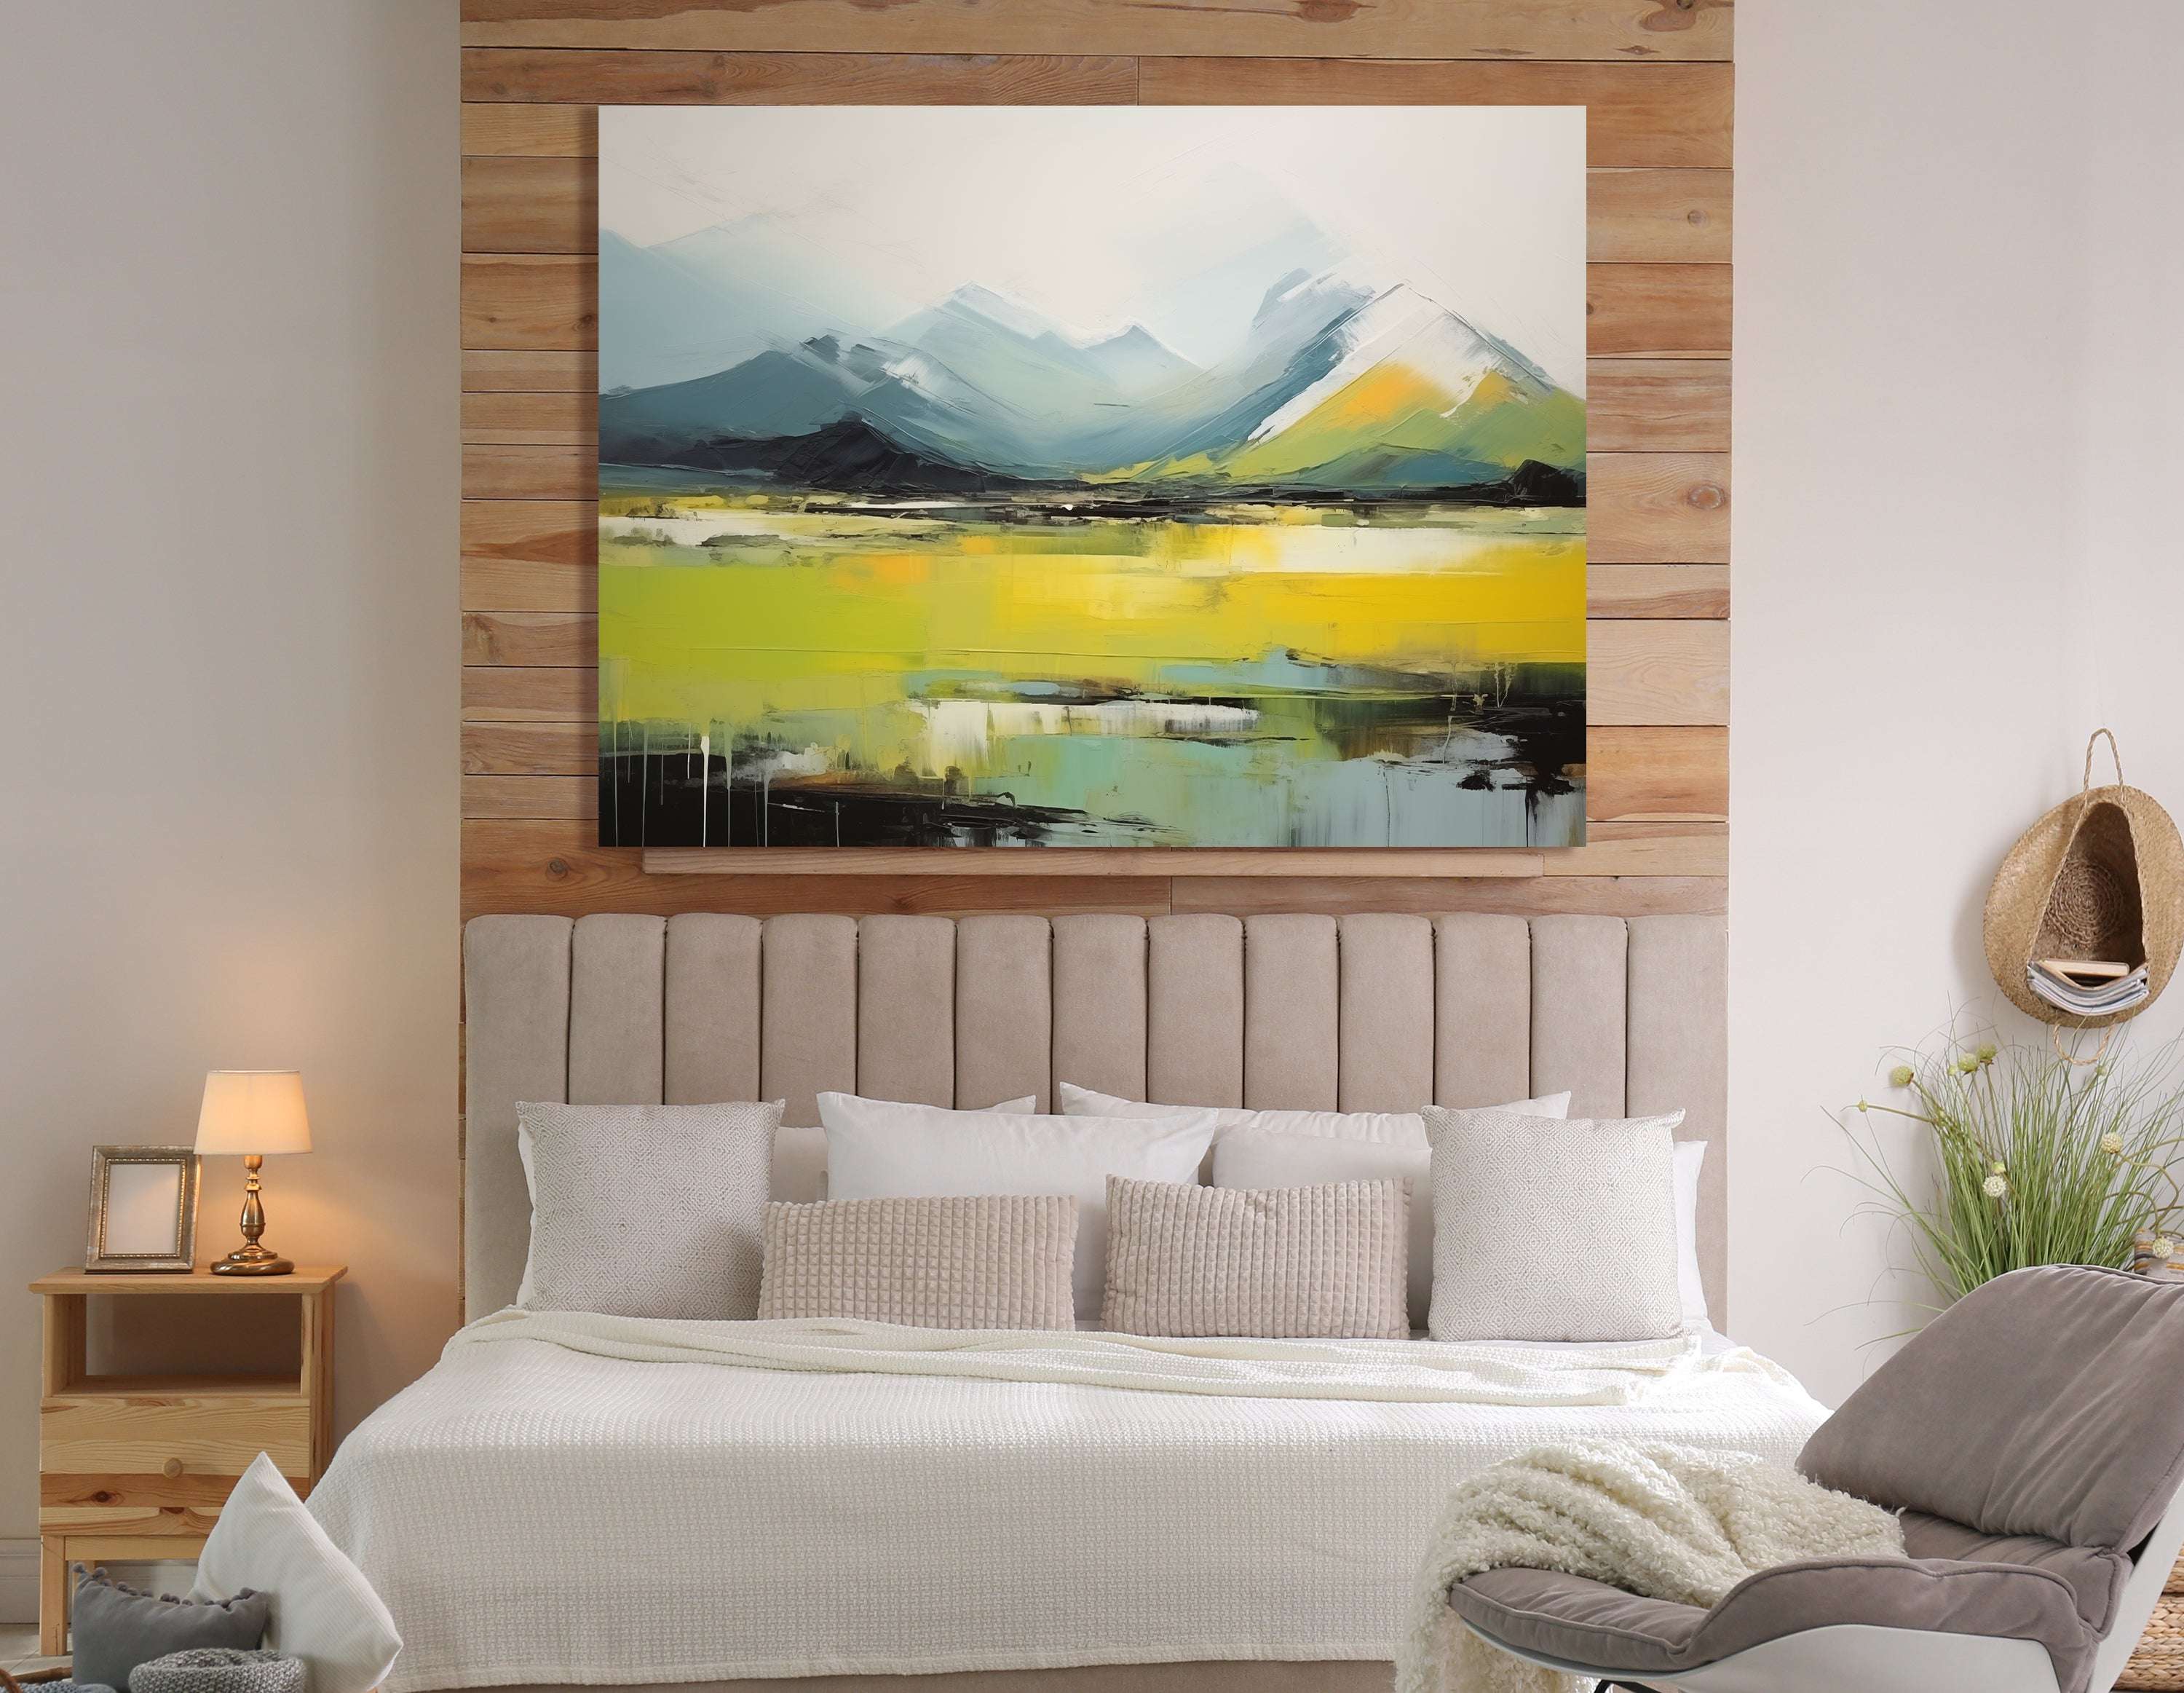 Abstract Mountain Landscape in White, Green, and Yellow - Canvas Print - Artoholica Ready to Hang Canvas Print